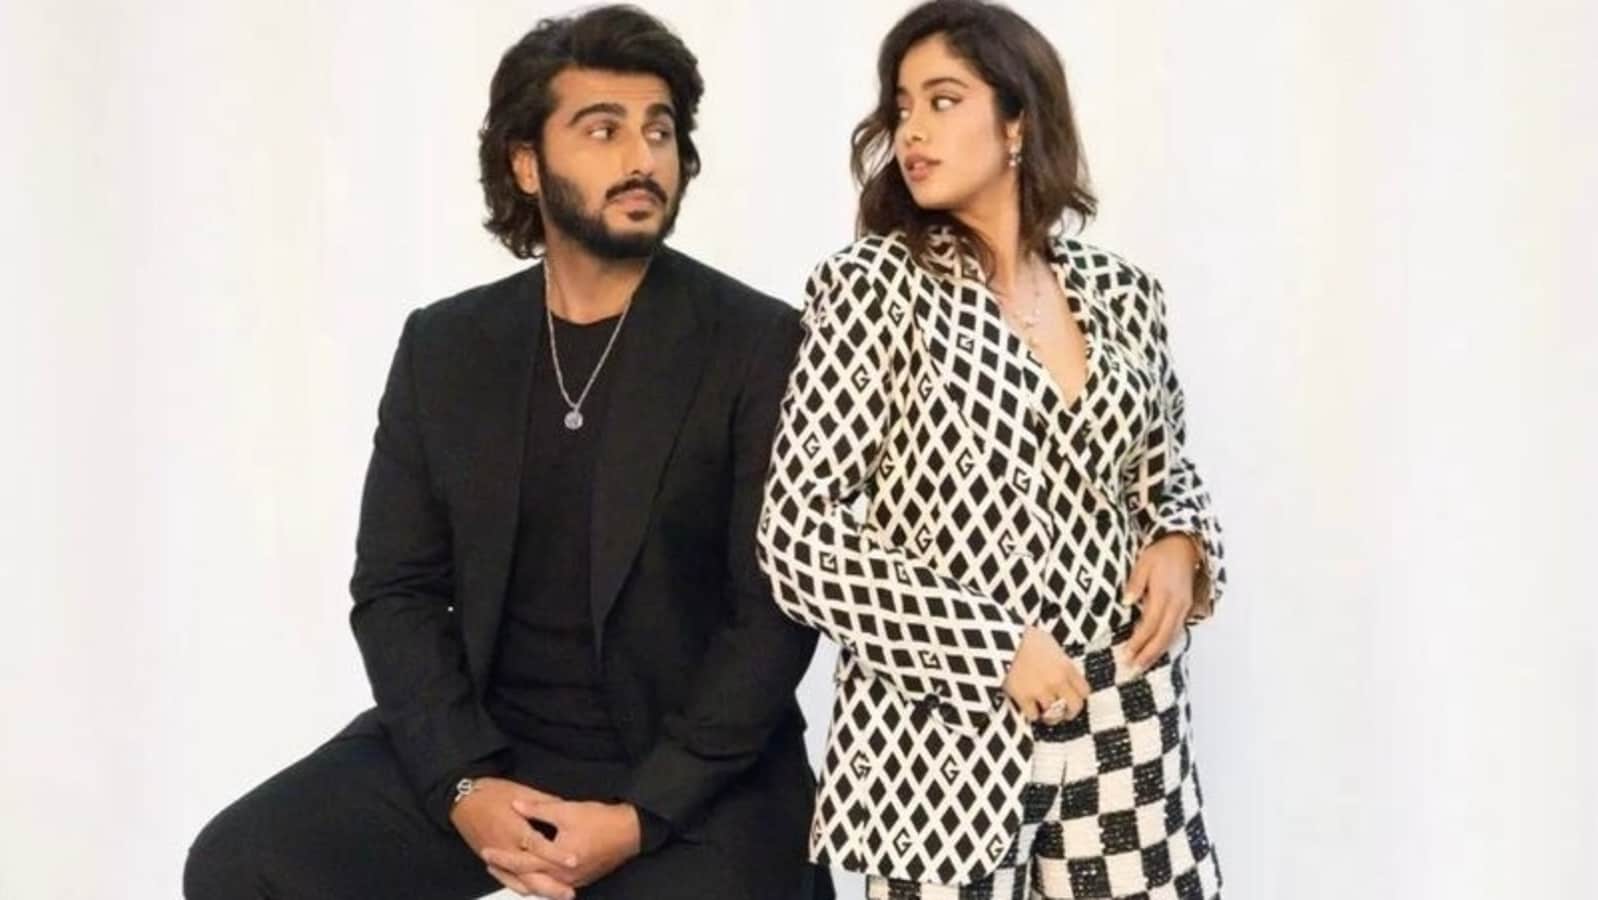 Arjun Kapoor reacts to sister Janhvi Kapoor getting insecure: ‘She is worried, has no confidence in her own ability’